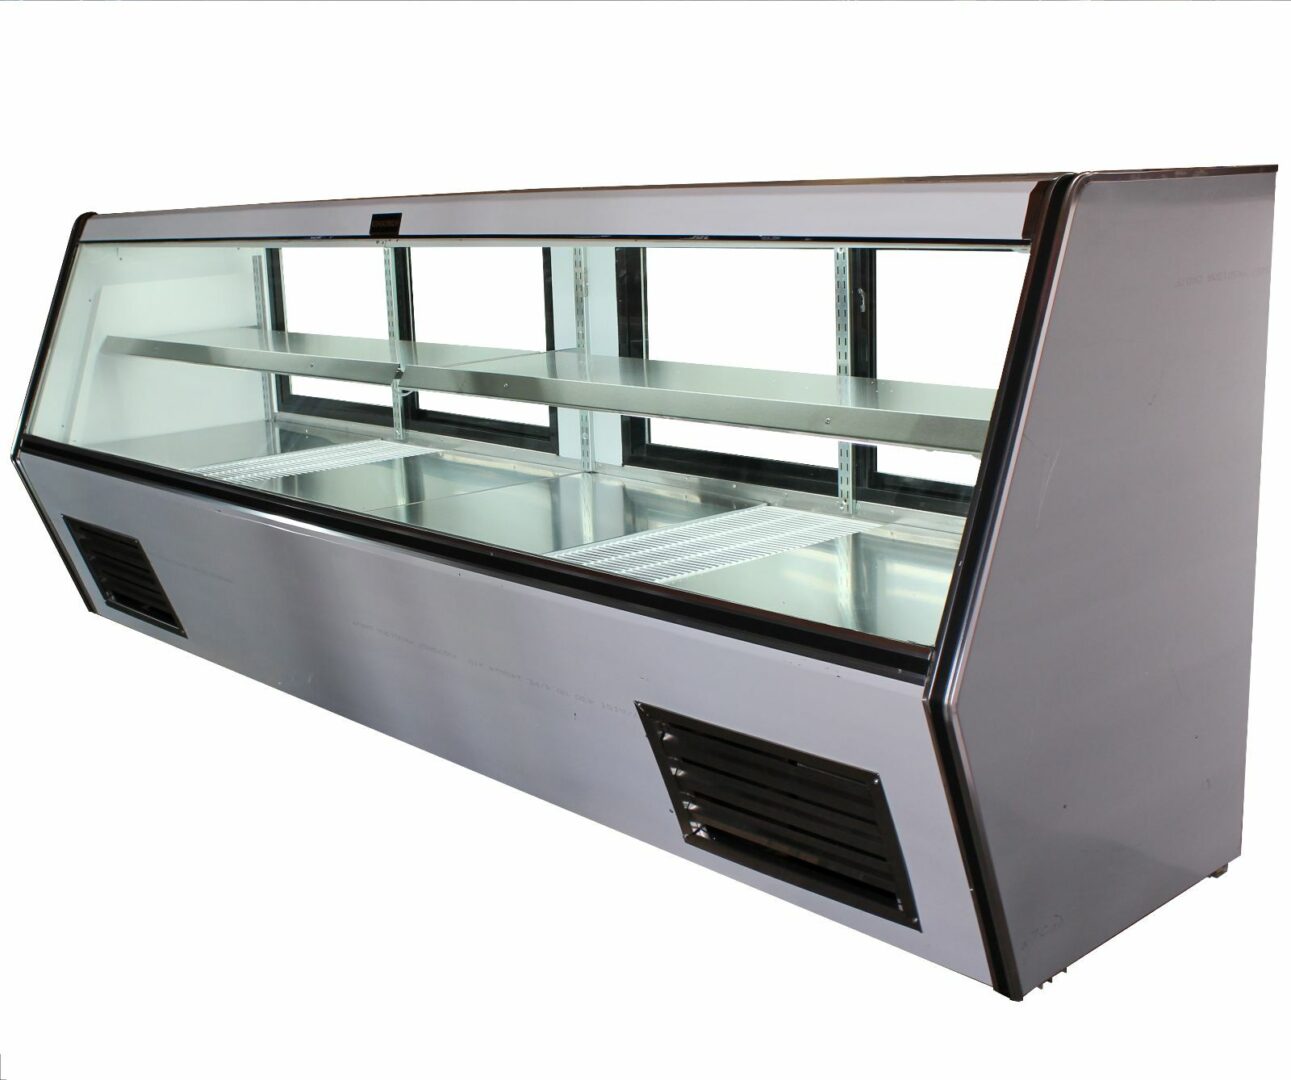 Cooltech Refrigerated Counter Deli Display Case 84” with glass front and top on a white background.